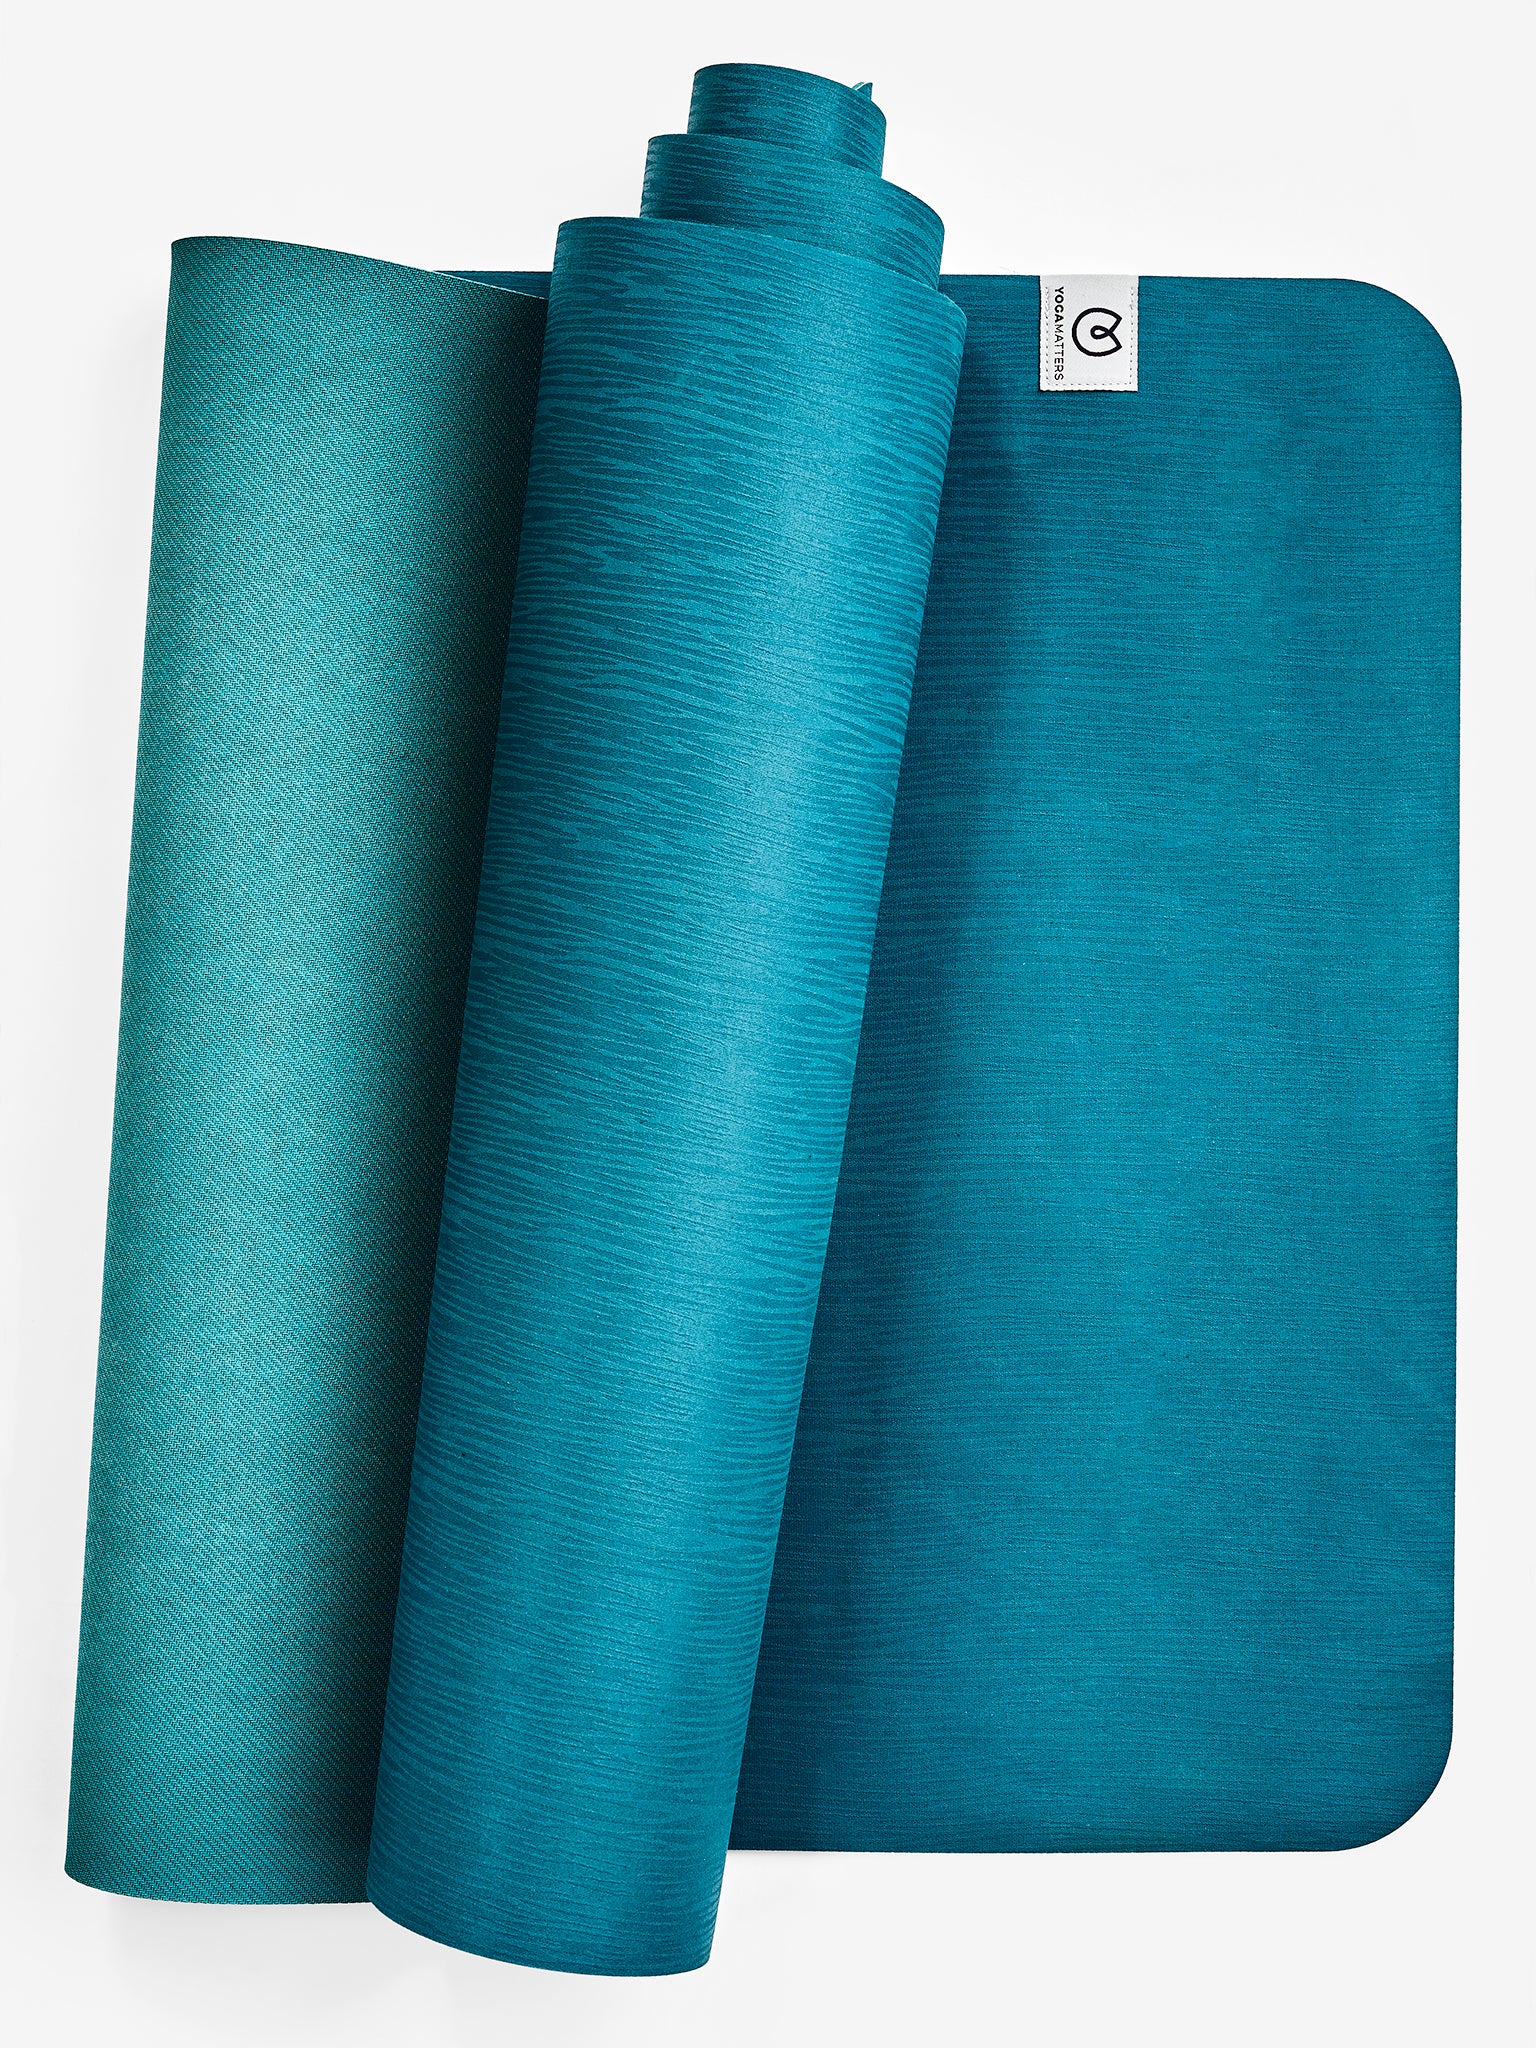 Teal textured yoga mat rolled and unrolled, non-slip surface, eco-friendly material, front view with visible brand logo, fitness and exercise accessory